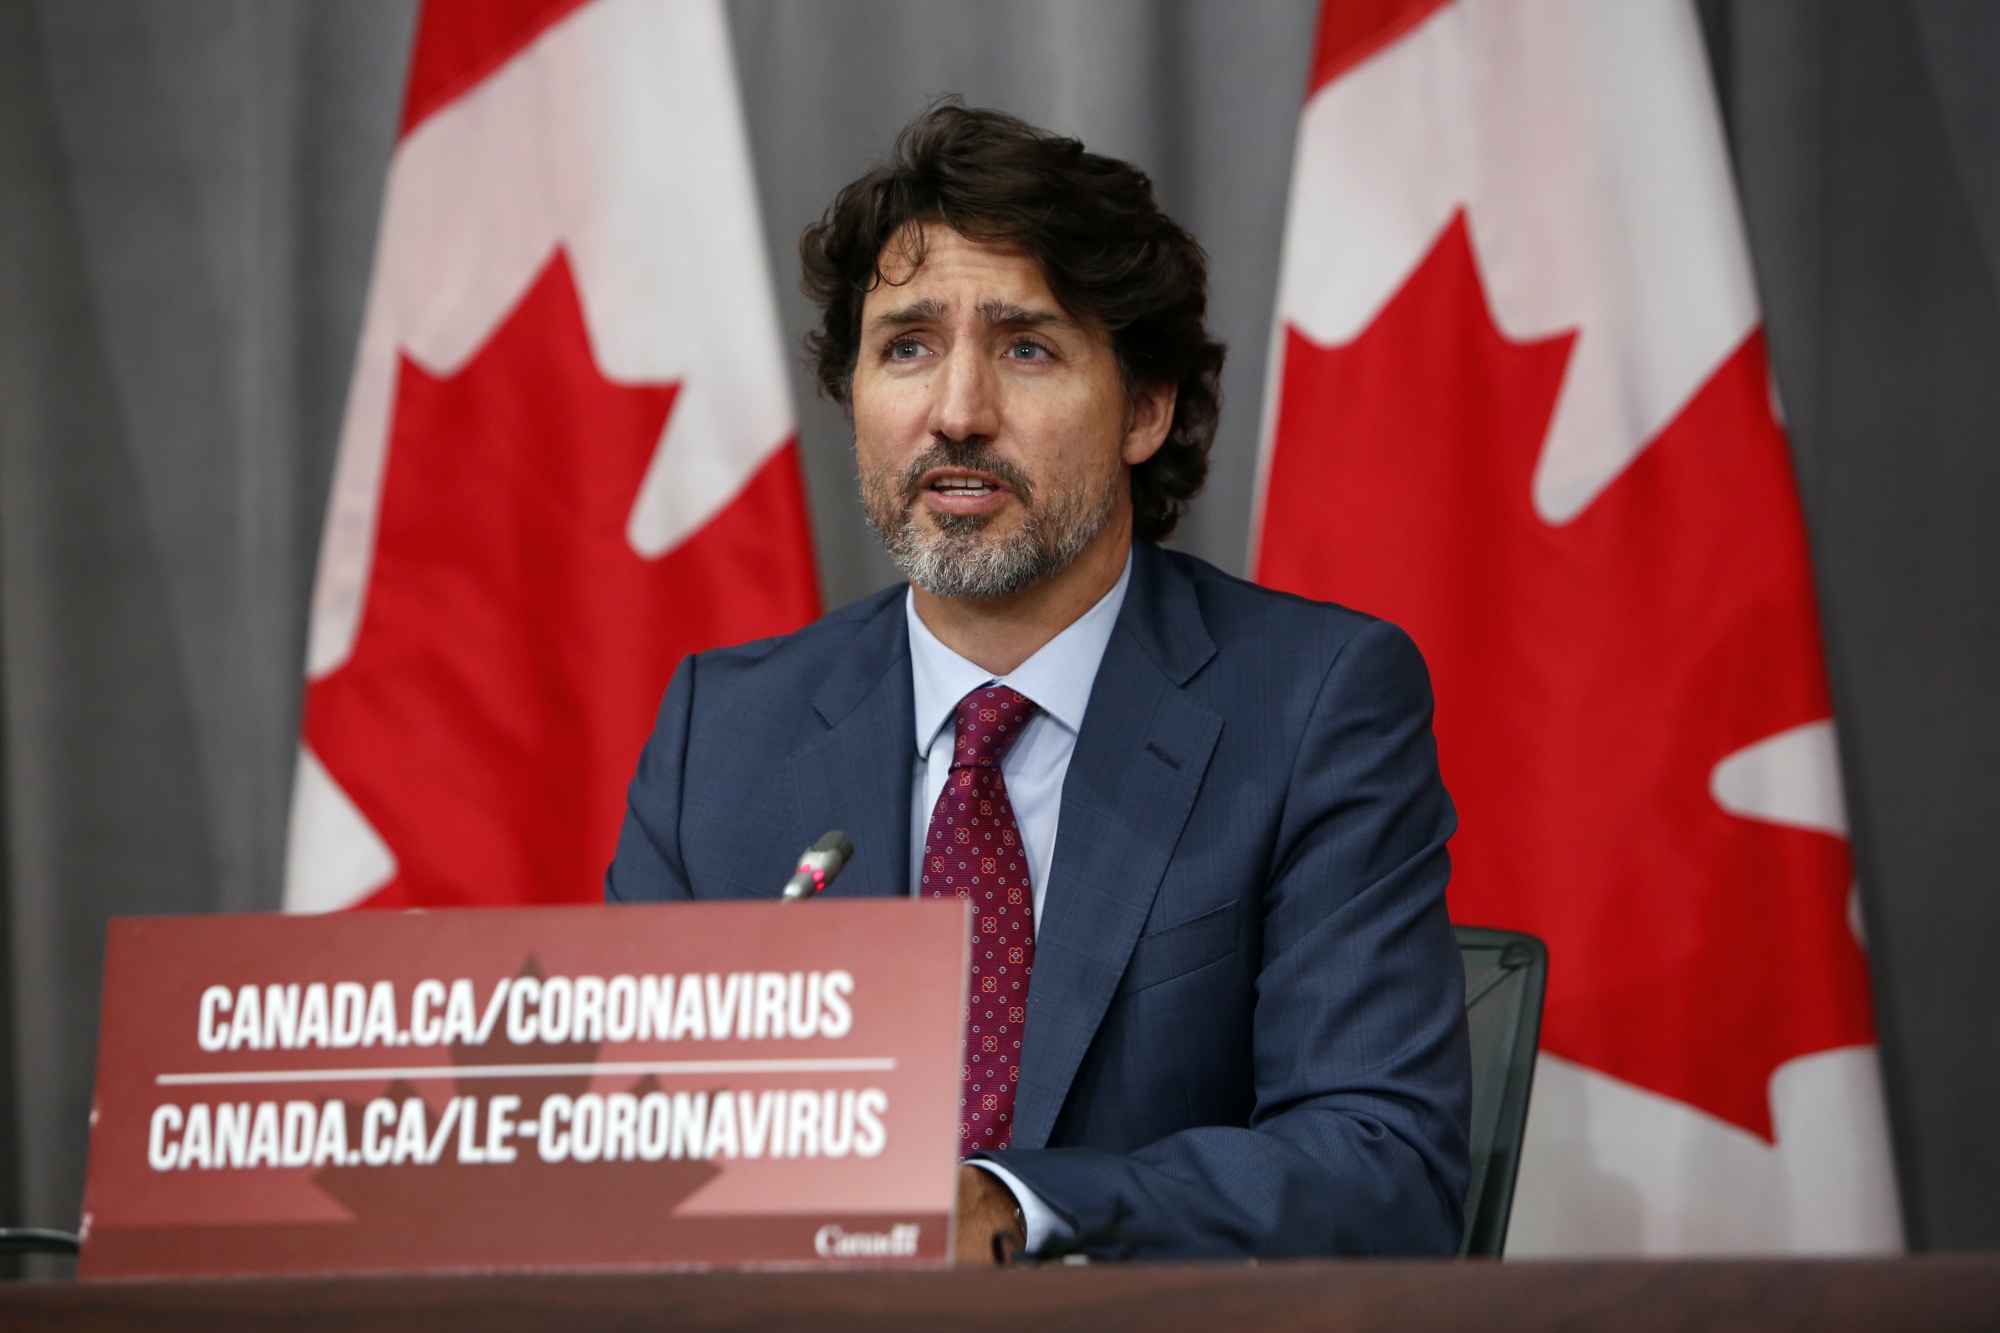 Justin Trudeau speaks during an Ottawa news conference on July 16, 2020.